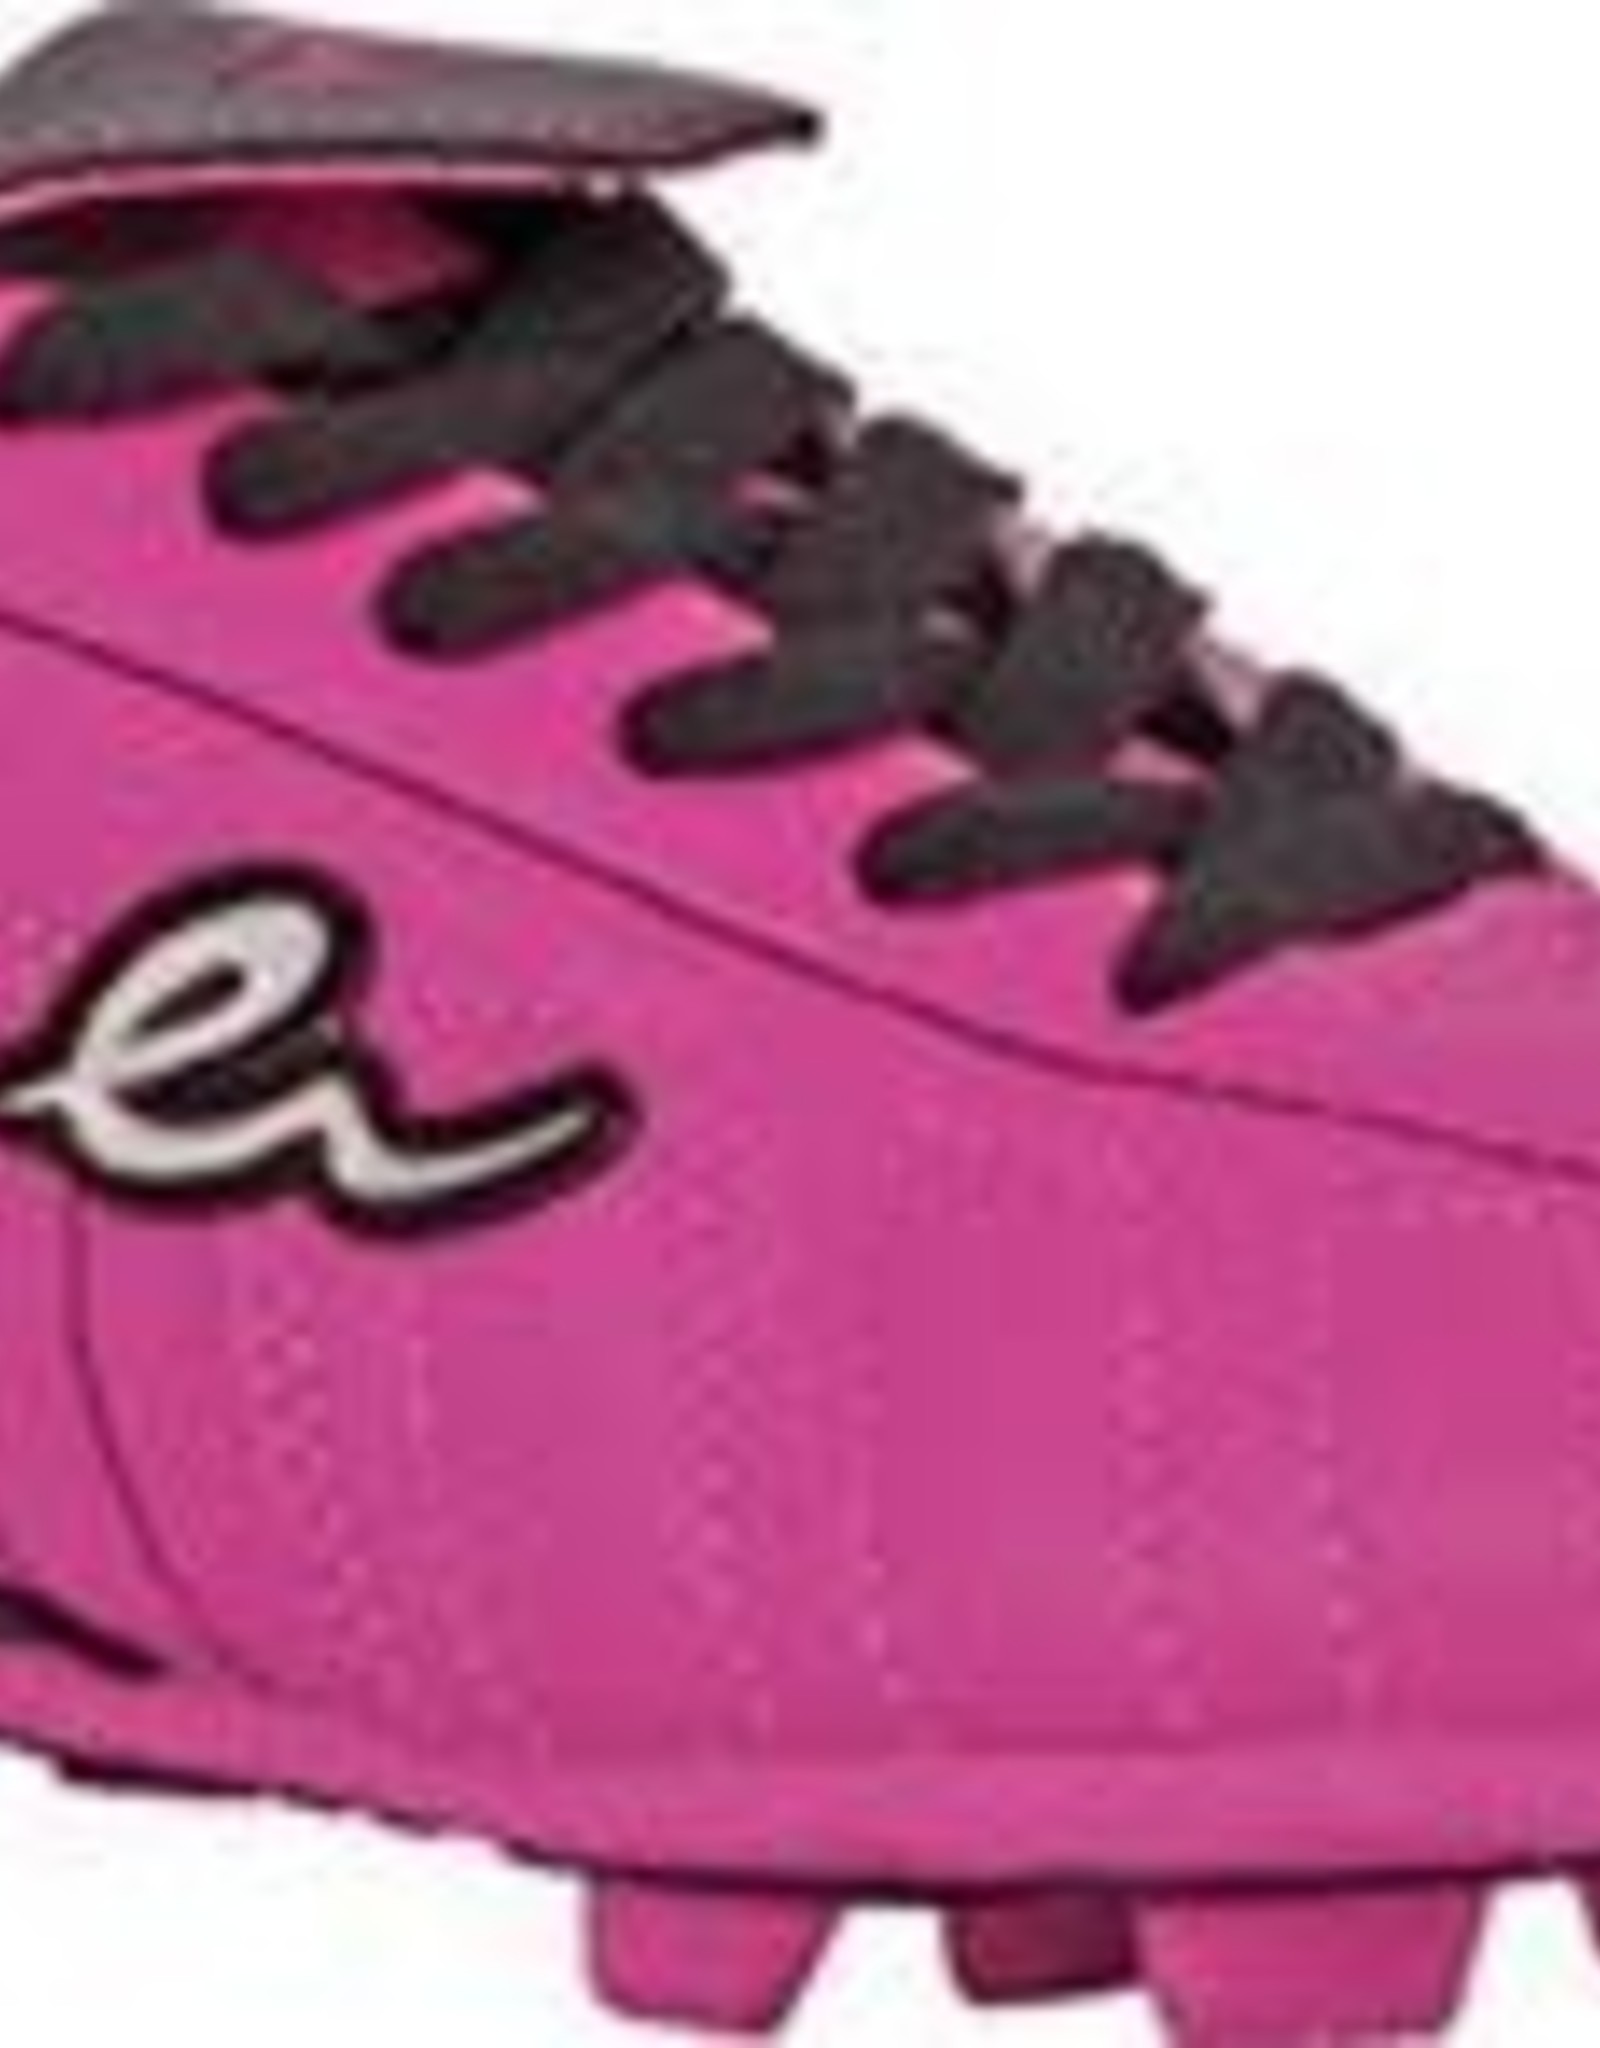 Eletto ELETTO SOULIER SOCCER AXION RB ROSE 8 SR